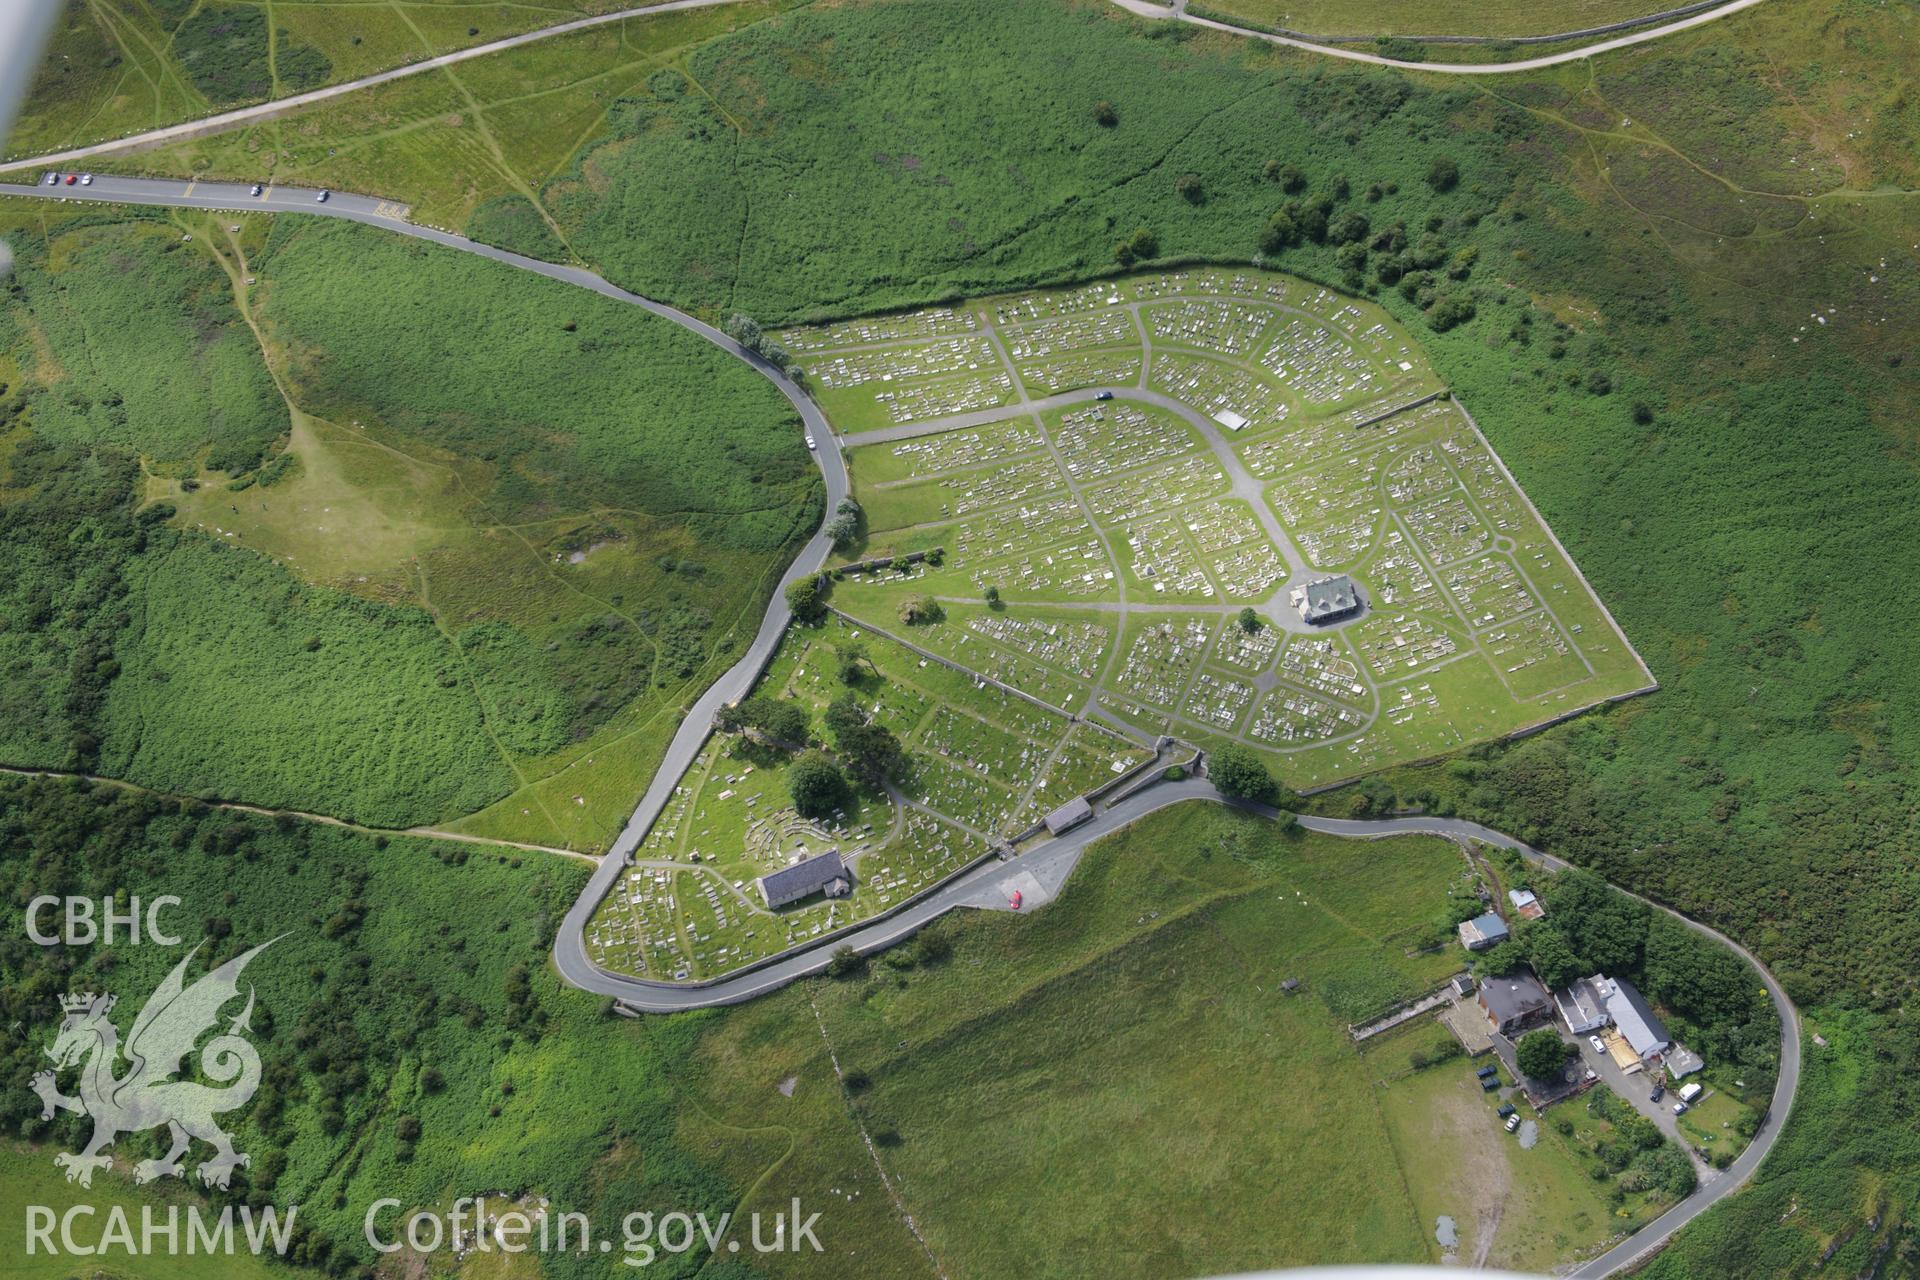 The Great Orme, Llandudno, including views of St. Tudno's church and well, cemetery, rectory and garden, and the foundations of long huts. Oblique aerial photograph taken during the Royal Commission's programme of archaeological aerial reconnaissance by Toby Driver on 30th July 2015.